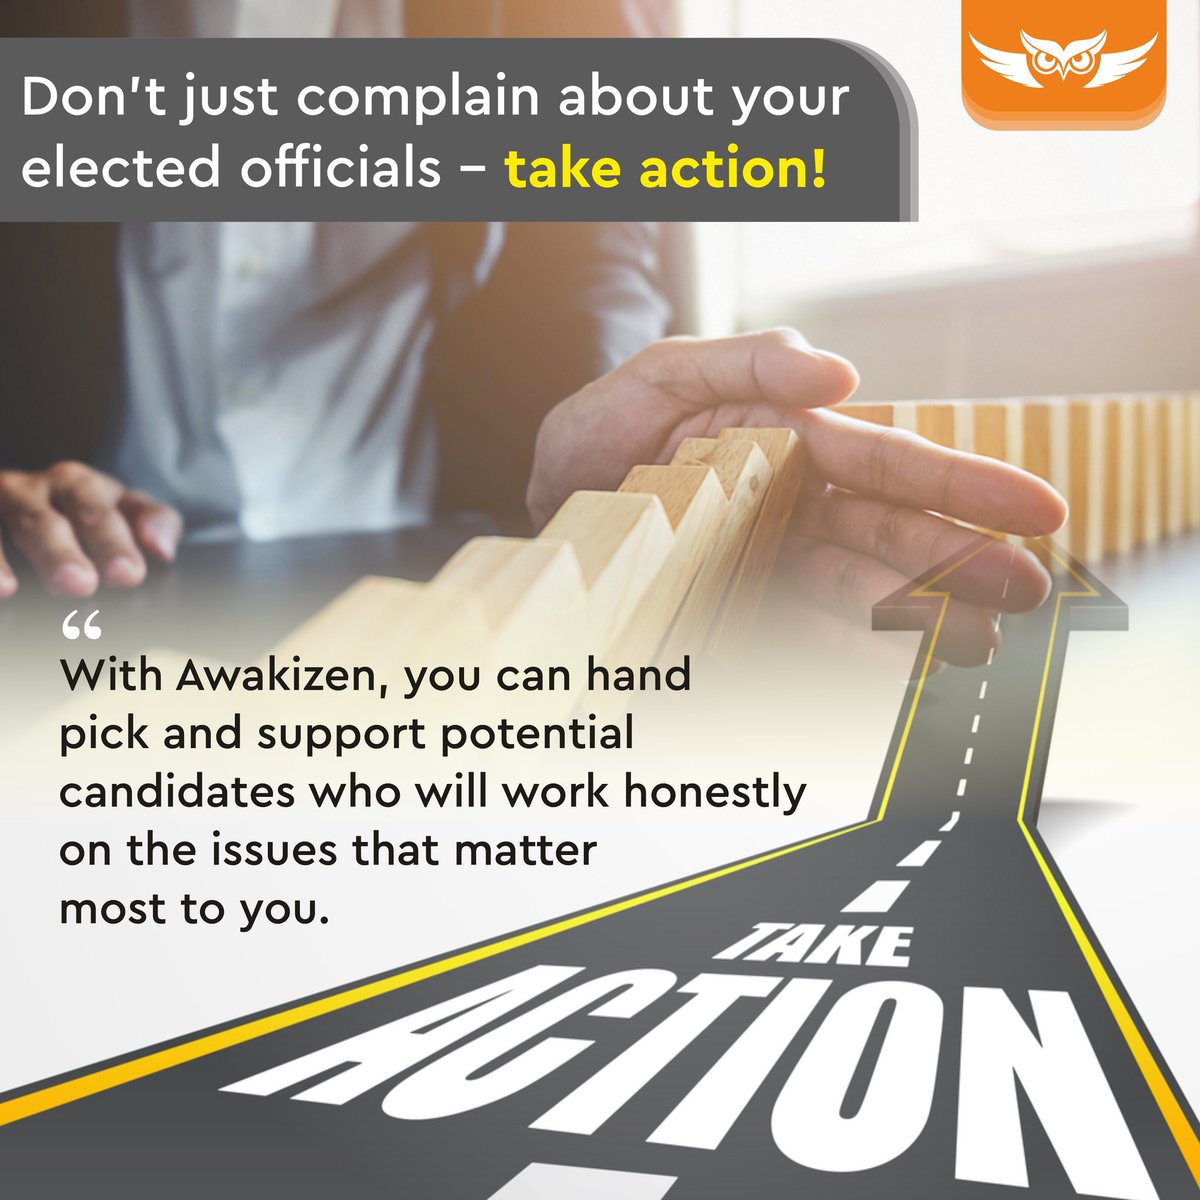 Empower your voice and make a difference! Join Awakizen today and support honest, driven candidates who will fight for the change you want to see in the world.Don't just sit back and complain,take action and make a real impact.#Awakizen #TakeAction #BeTheChange #SupportCandidates